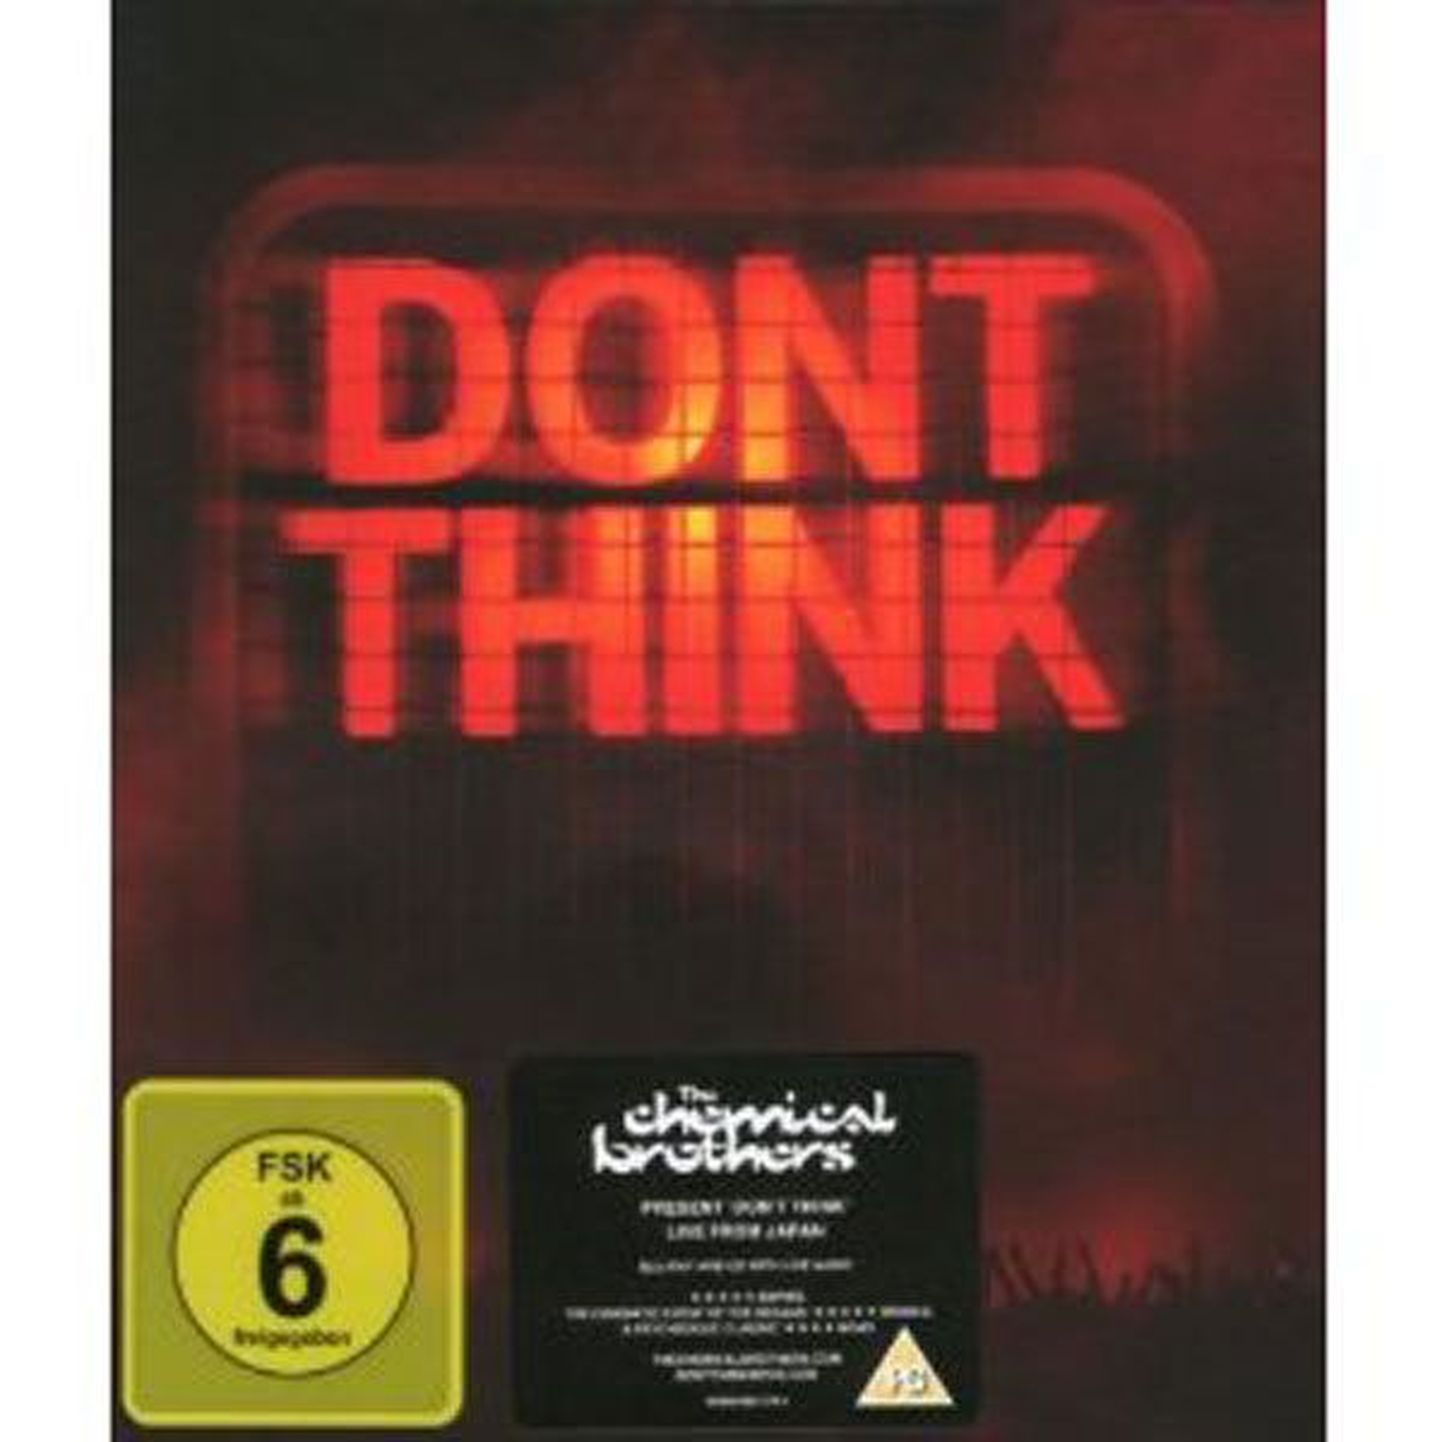 The Chemical Brothers
Don’t Think 
(EMI)